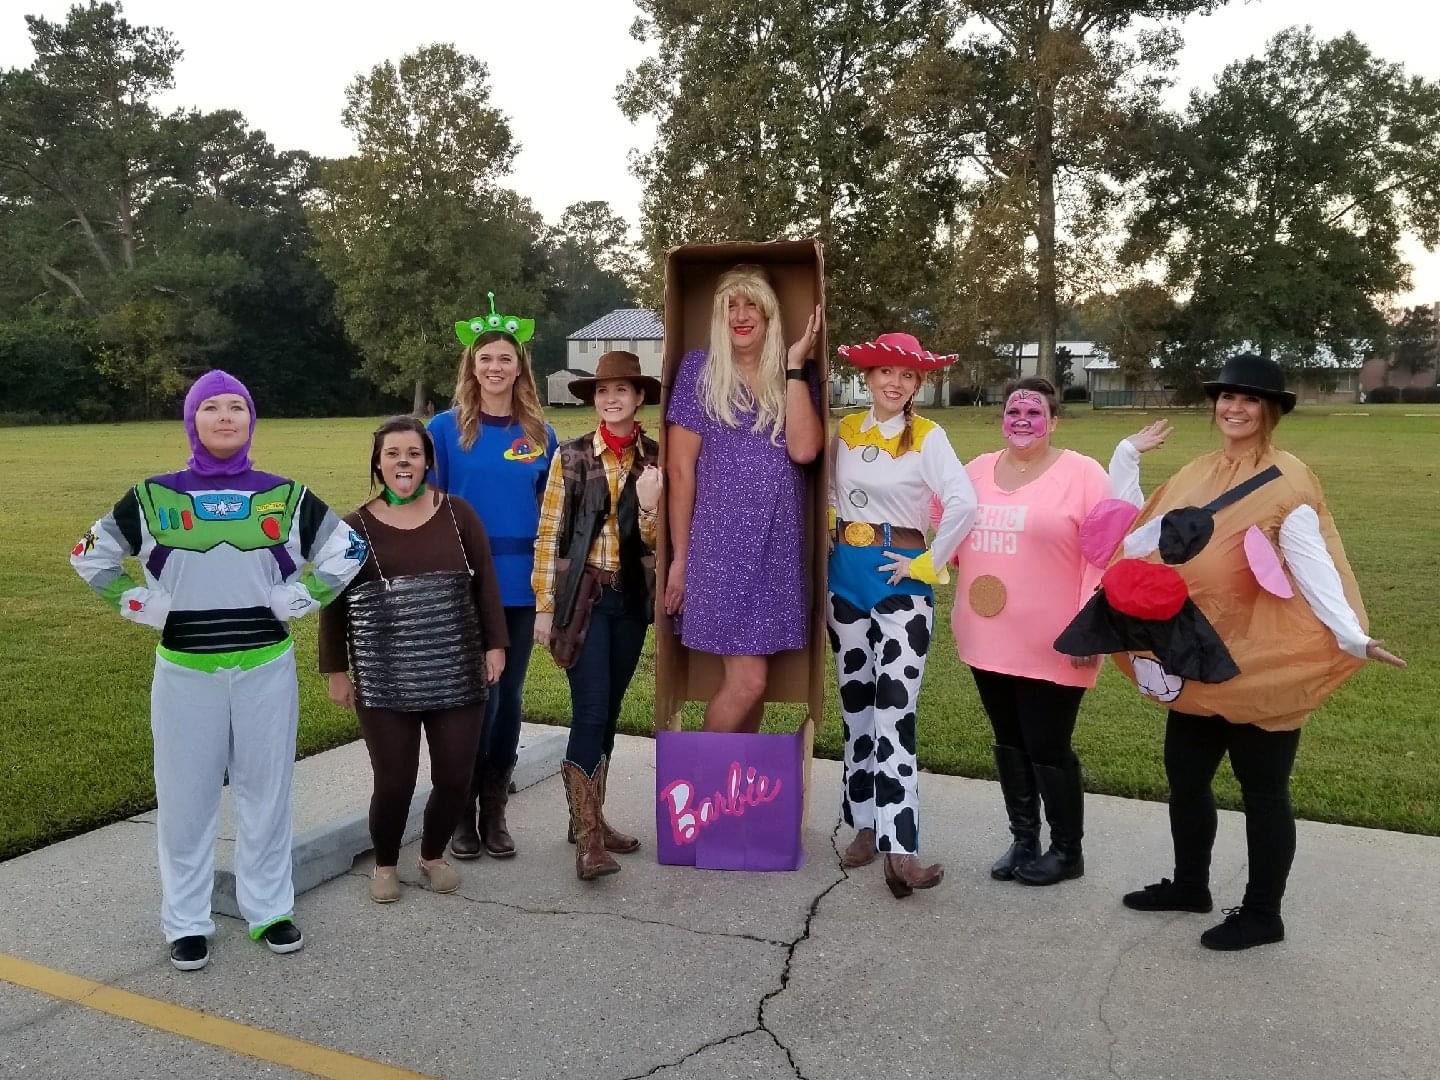 Our Finance team showing off their Halloween spirit as the cast of Toy Story. 